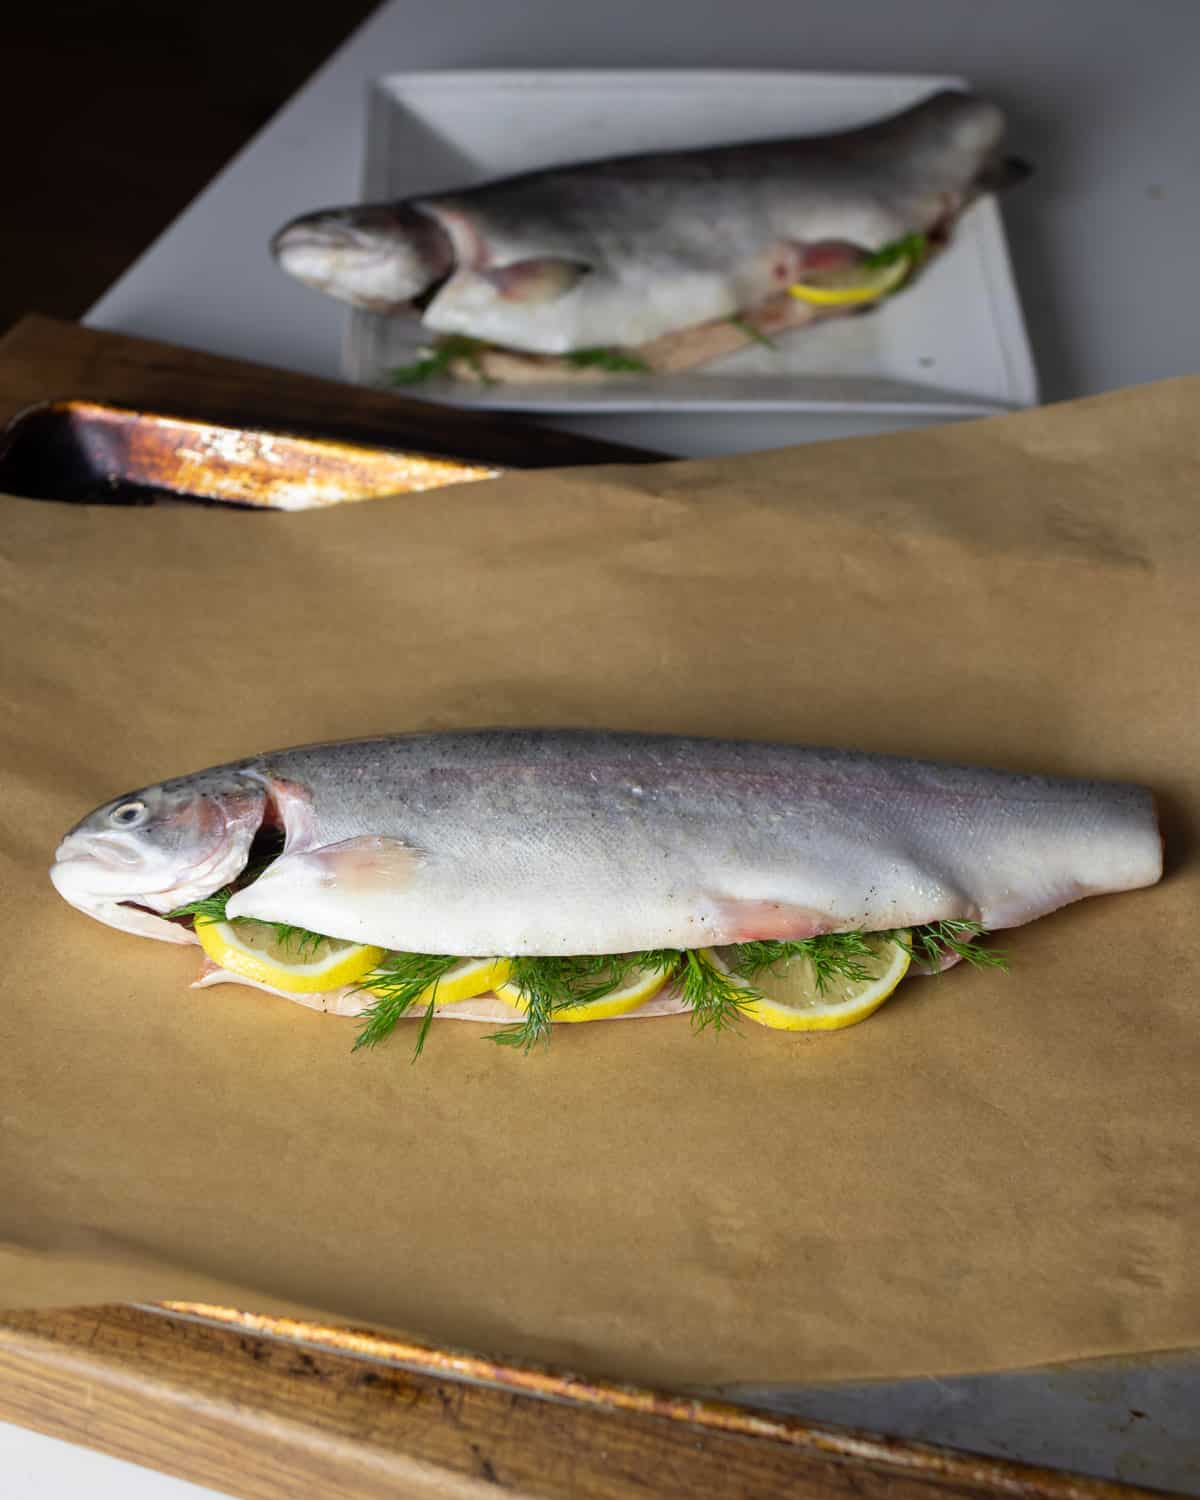 A prepared fish on a sheet of parchment paper.